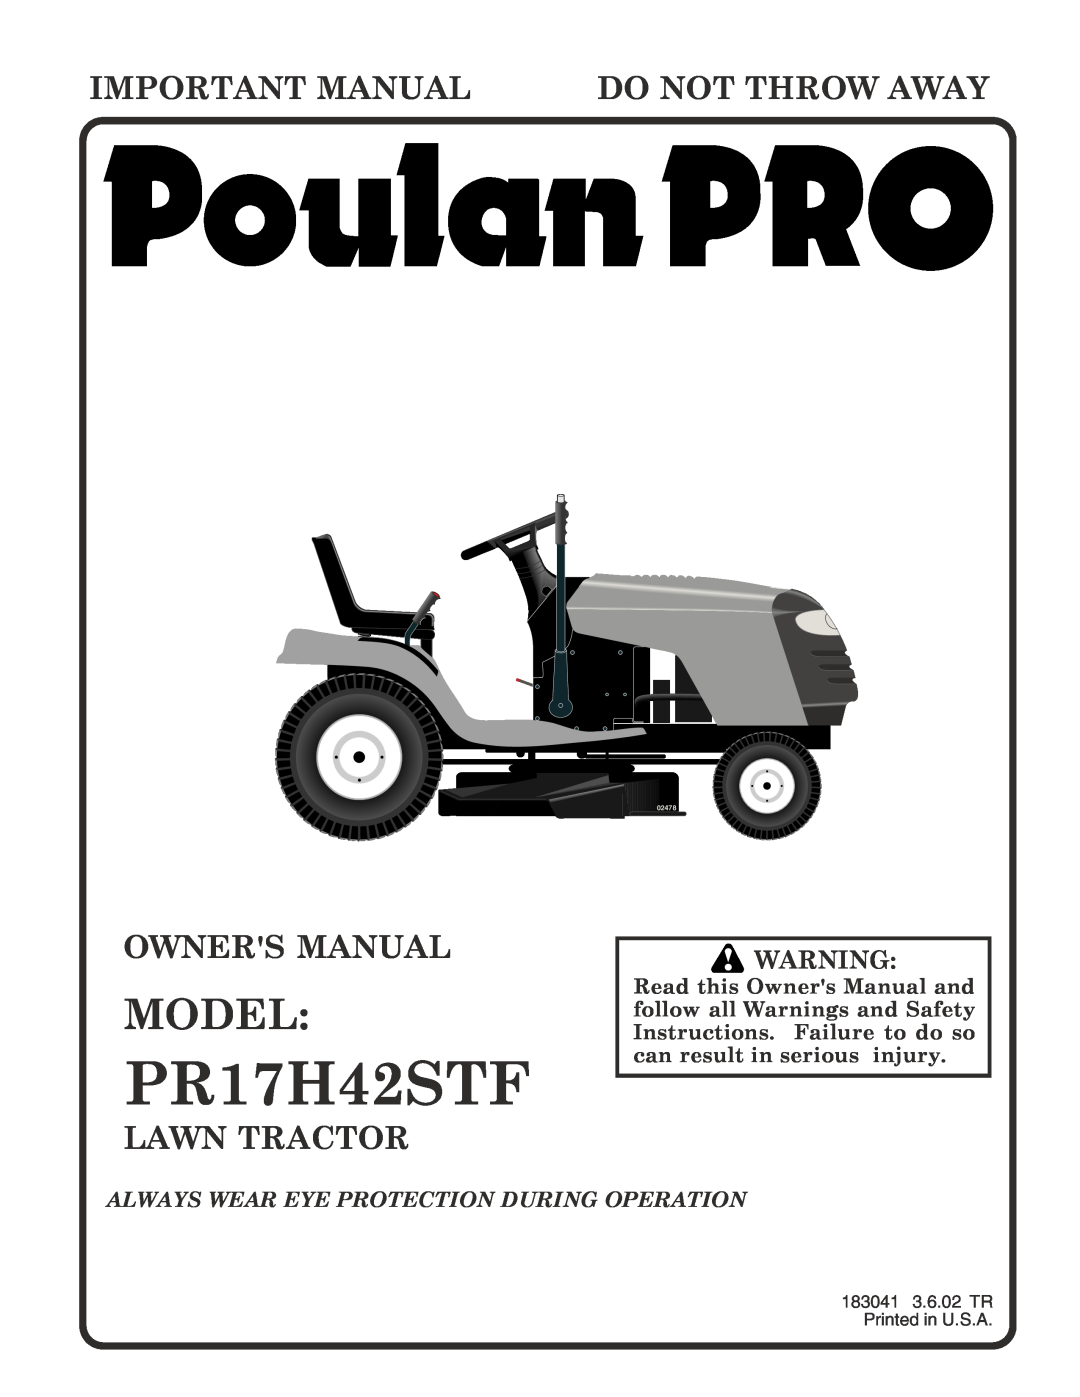 Poulan 183041 owner manual PR17H42STF, Model, Important Manual, Do Not Throw Away, Owners Manual, Lawn Tractor, 02478 